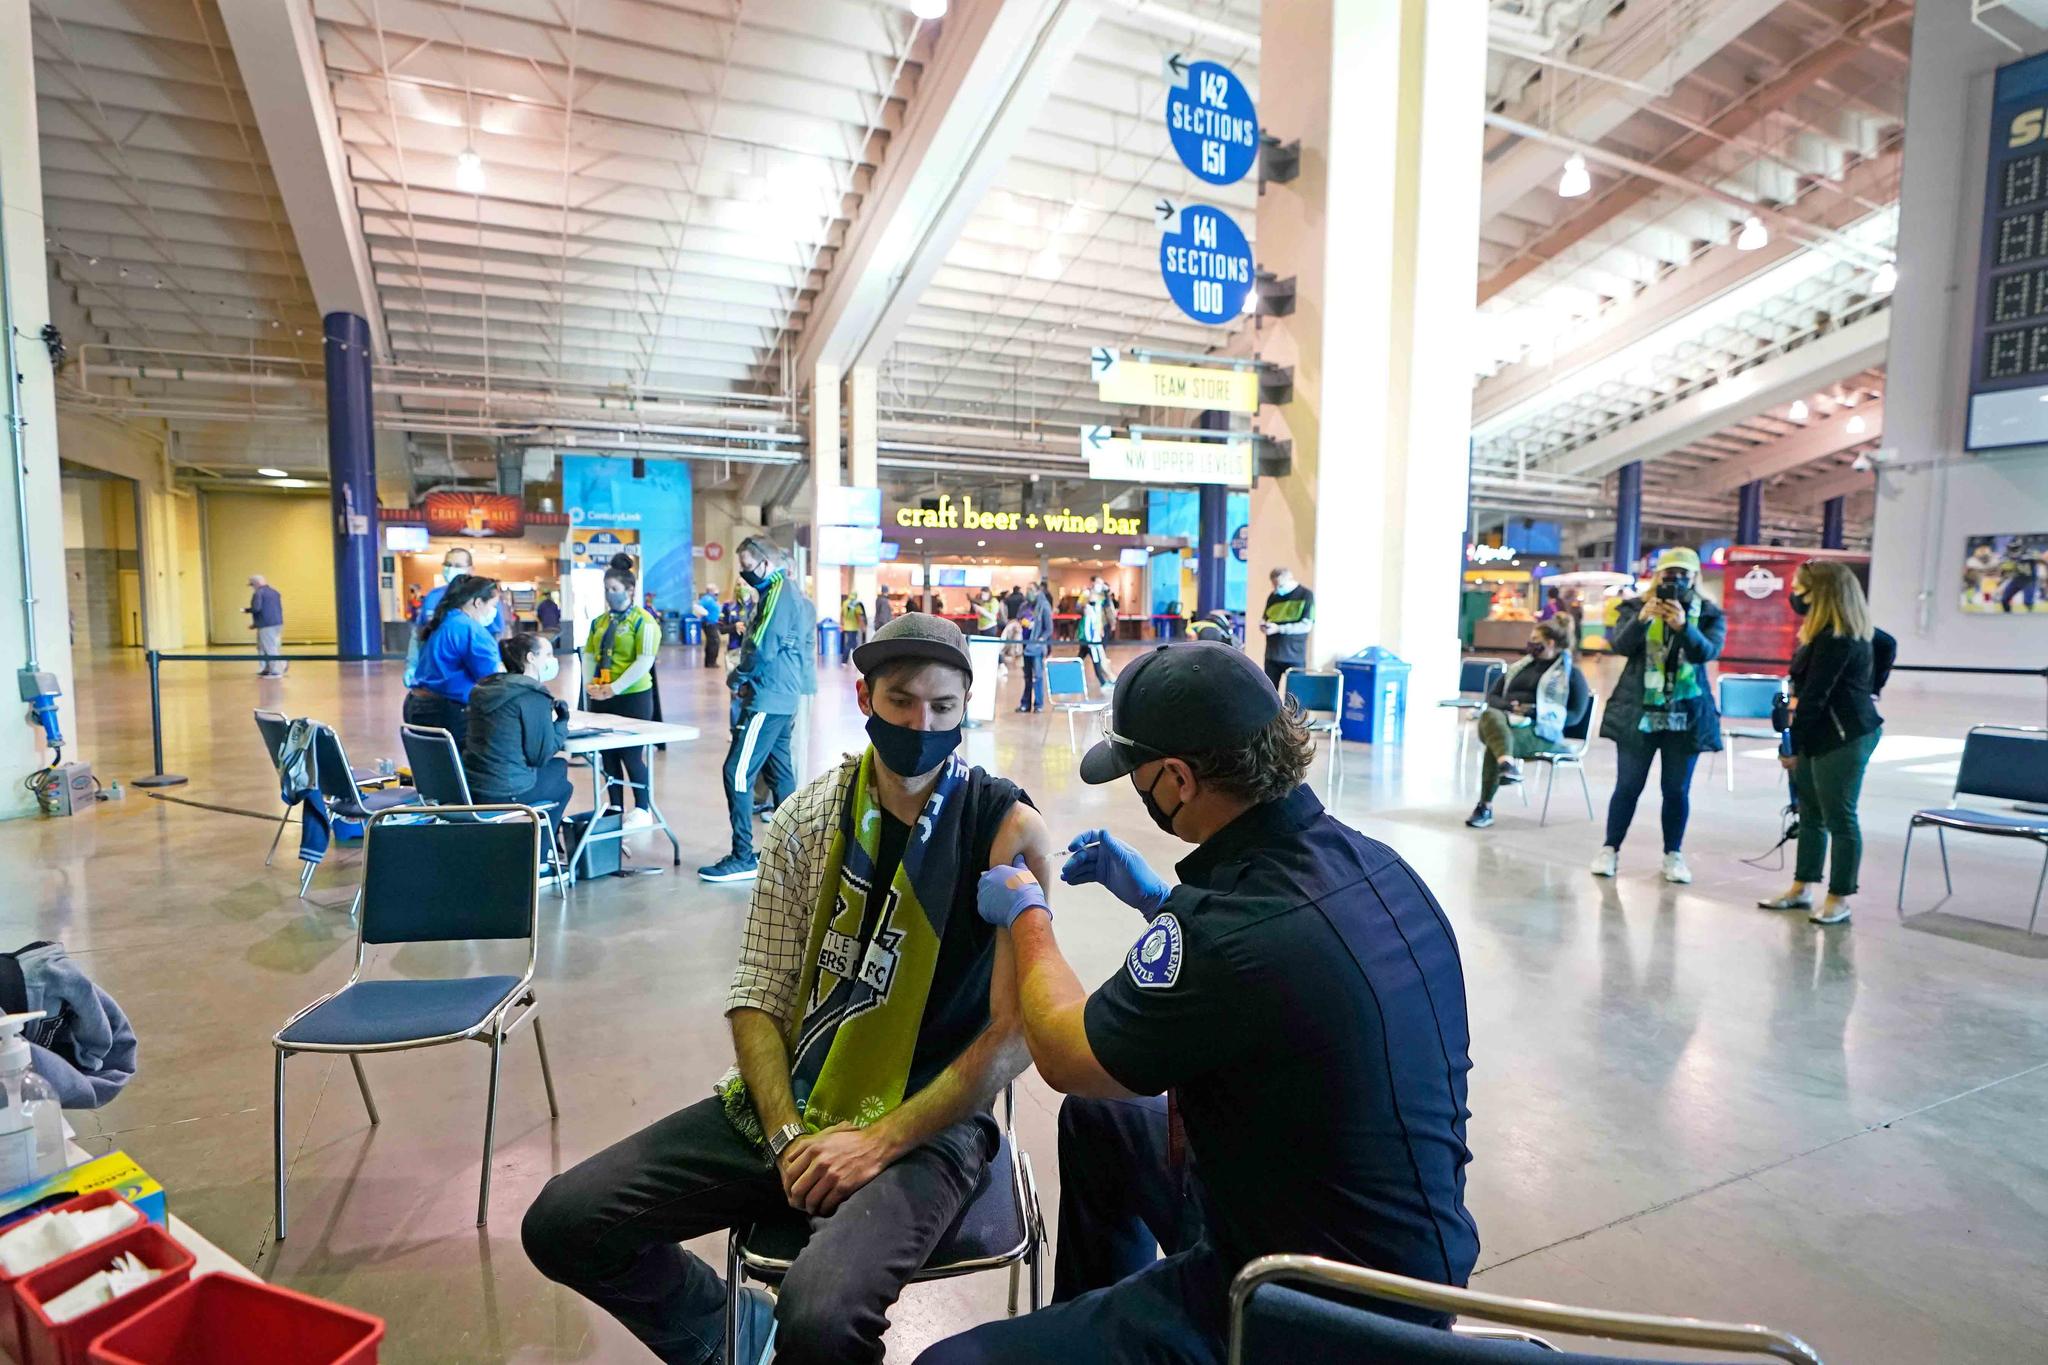 Austin Kennedy, left, a Seattle Sounders season ticket holder, gets the Johnson & Johnson COVID-19 vaccine at a clinic in a concourse at Lumen Field prior to an MLS soccer match between the Sounders and the Los Angeles Galaxy.